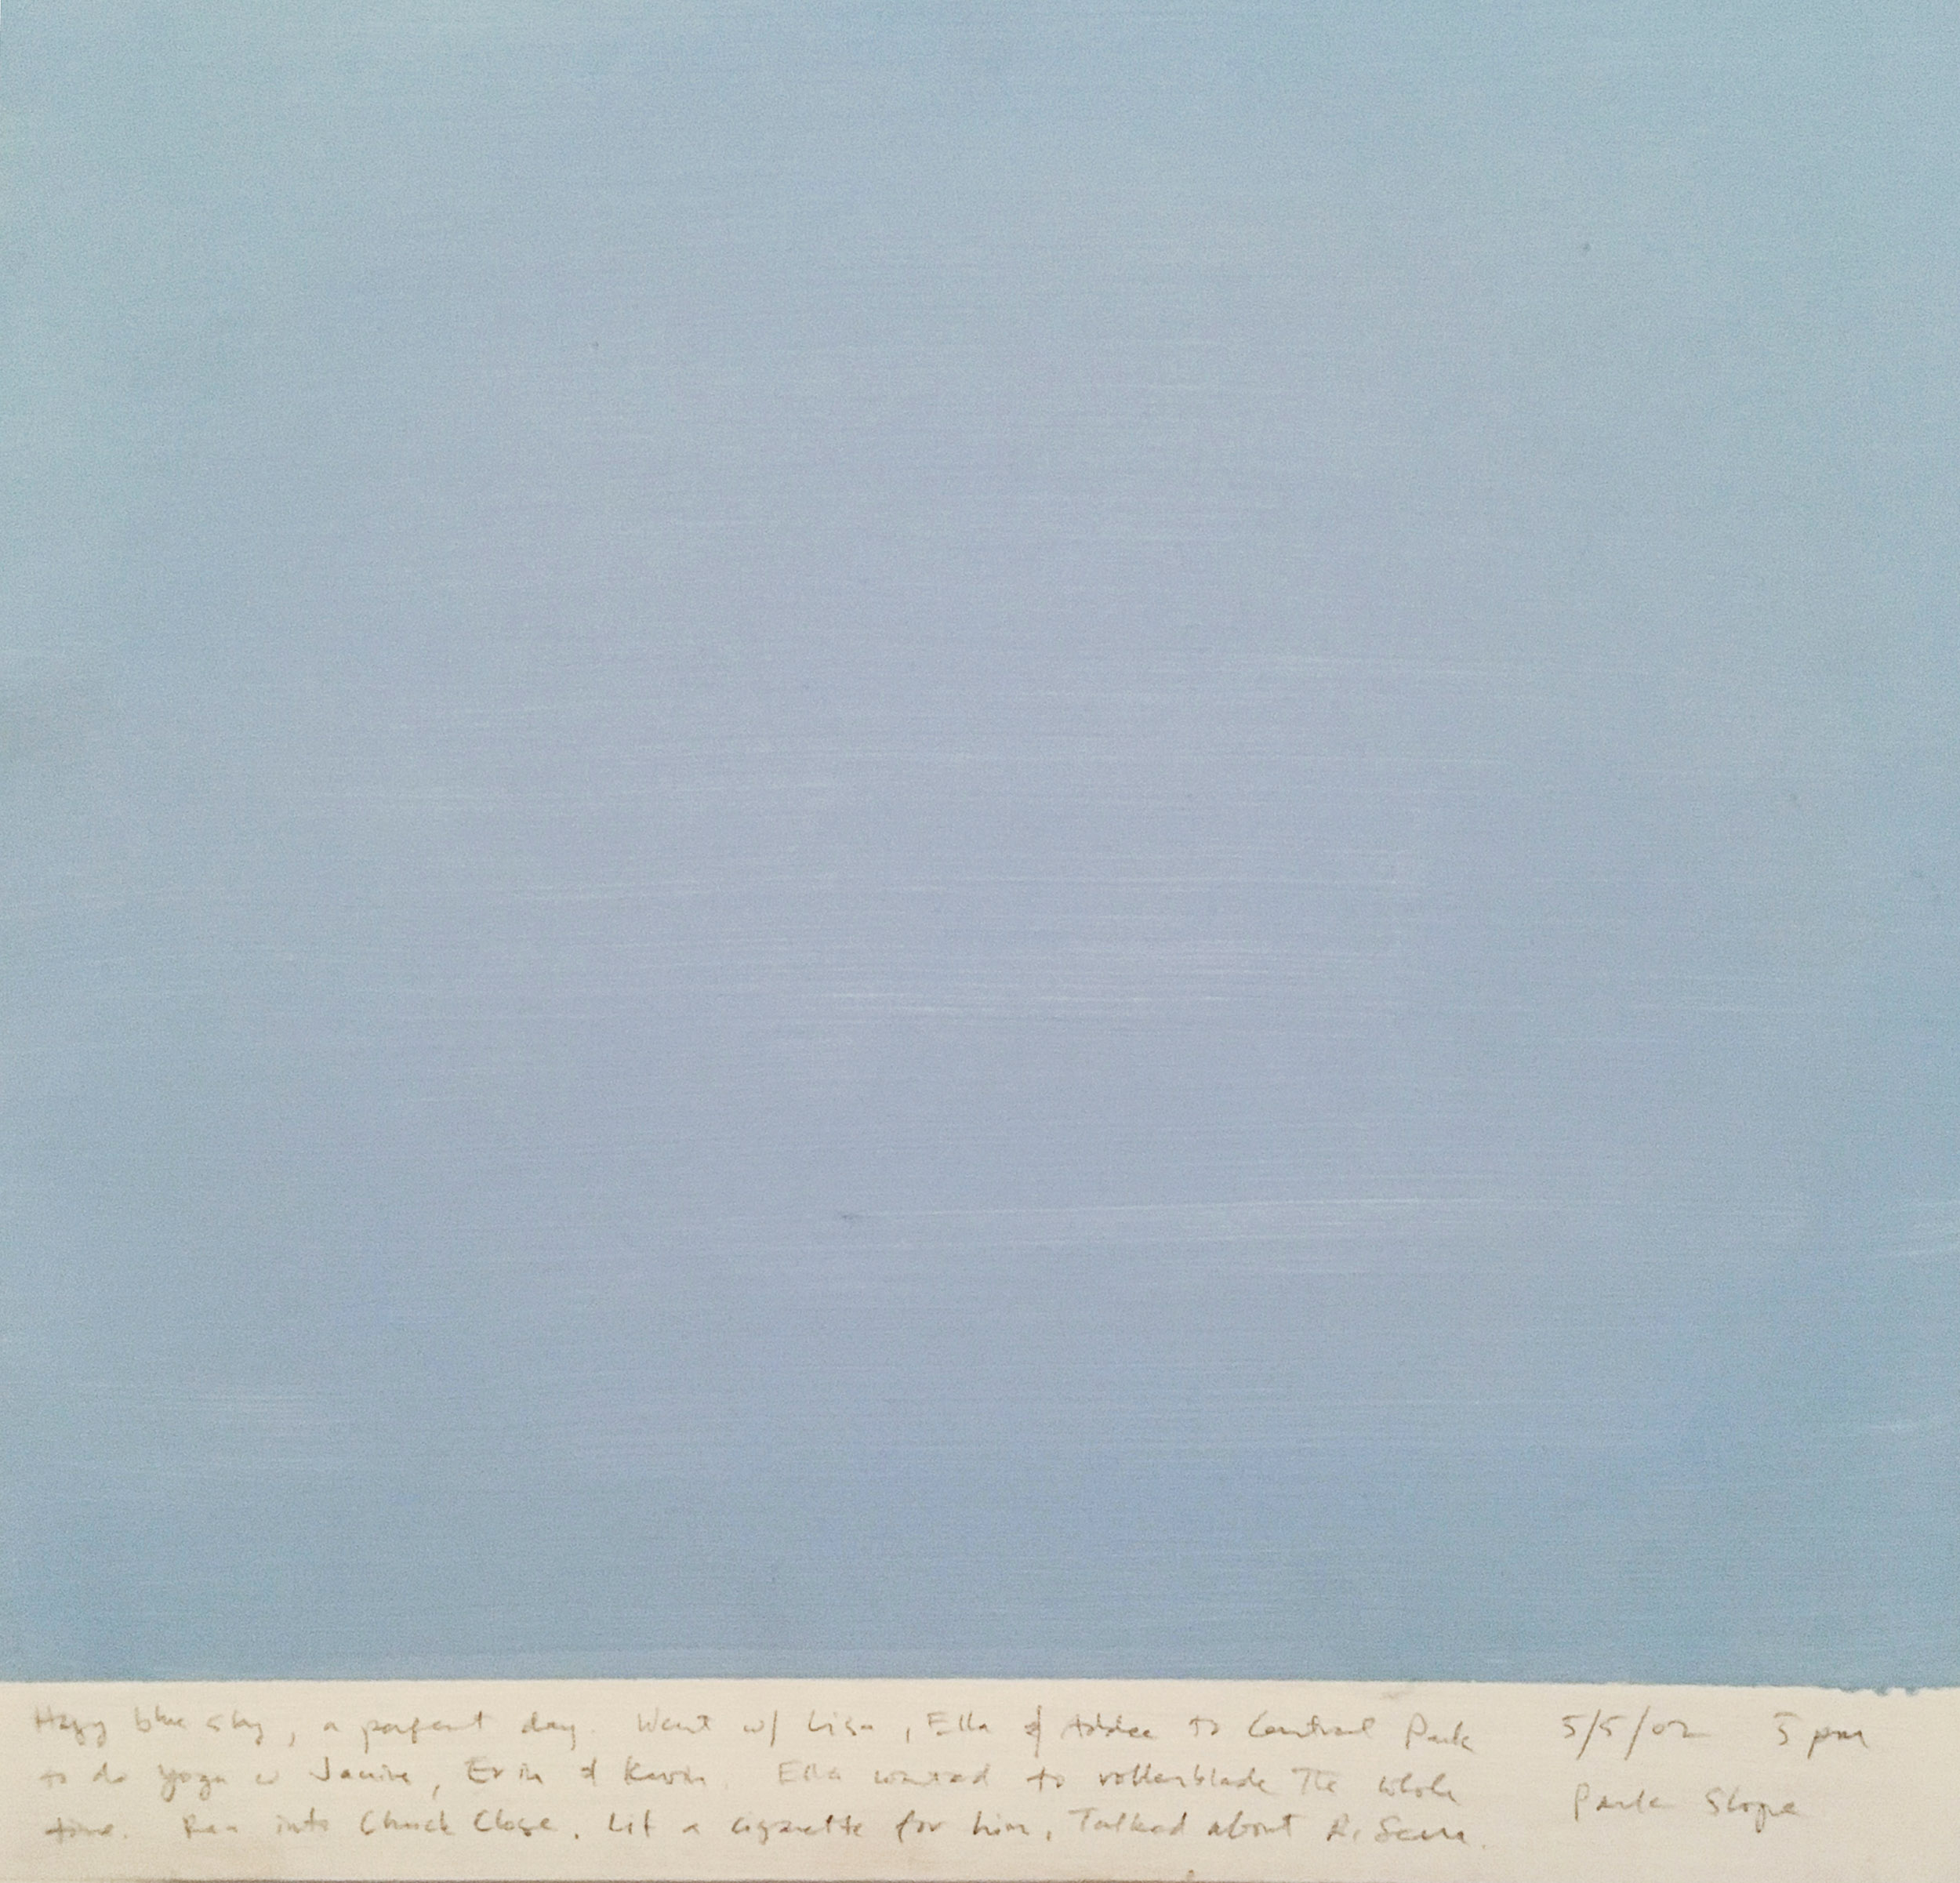 A 14 × 14 inch, acrylic painting of the sky. A journal entry is handwritten on the painting:

“Hazy blue sky, a perfect day. Went w/ Lisa, Ella & Addee to Central Park to do yoga w Janine, Erin & Kevin. Ella wanted to rollerblade the whole time. Ran into Chuck Close. Lit a cigarette for him, Talked about R. Serra.

5/5/02 5 pm
Park Slope”